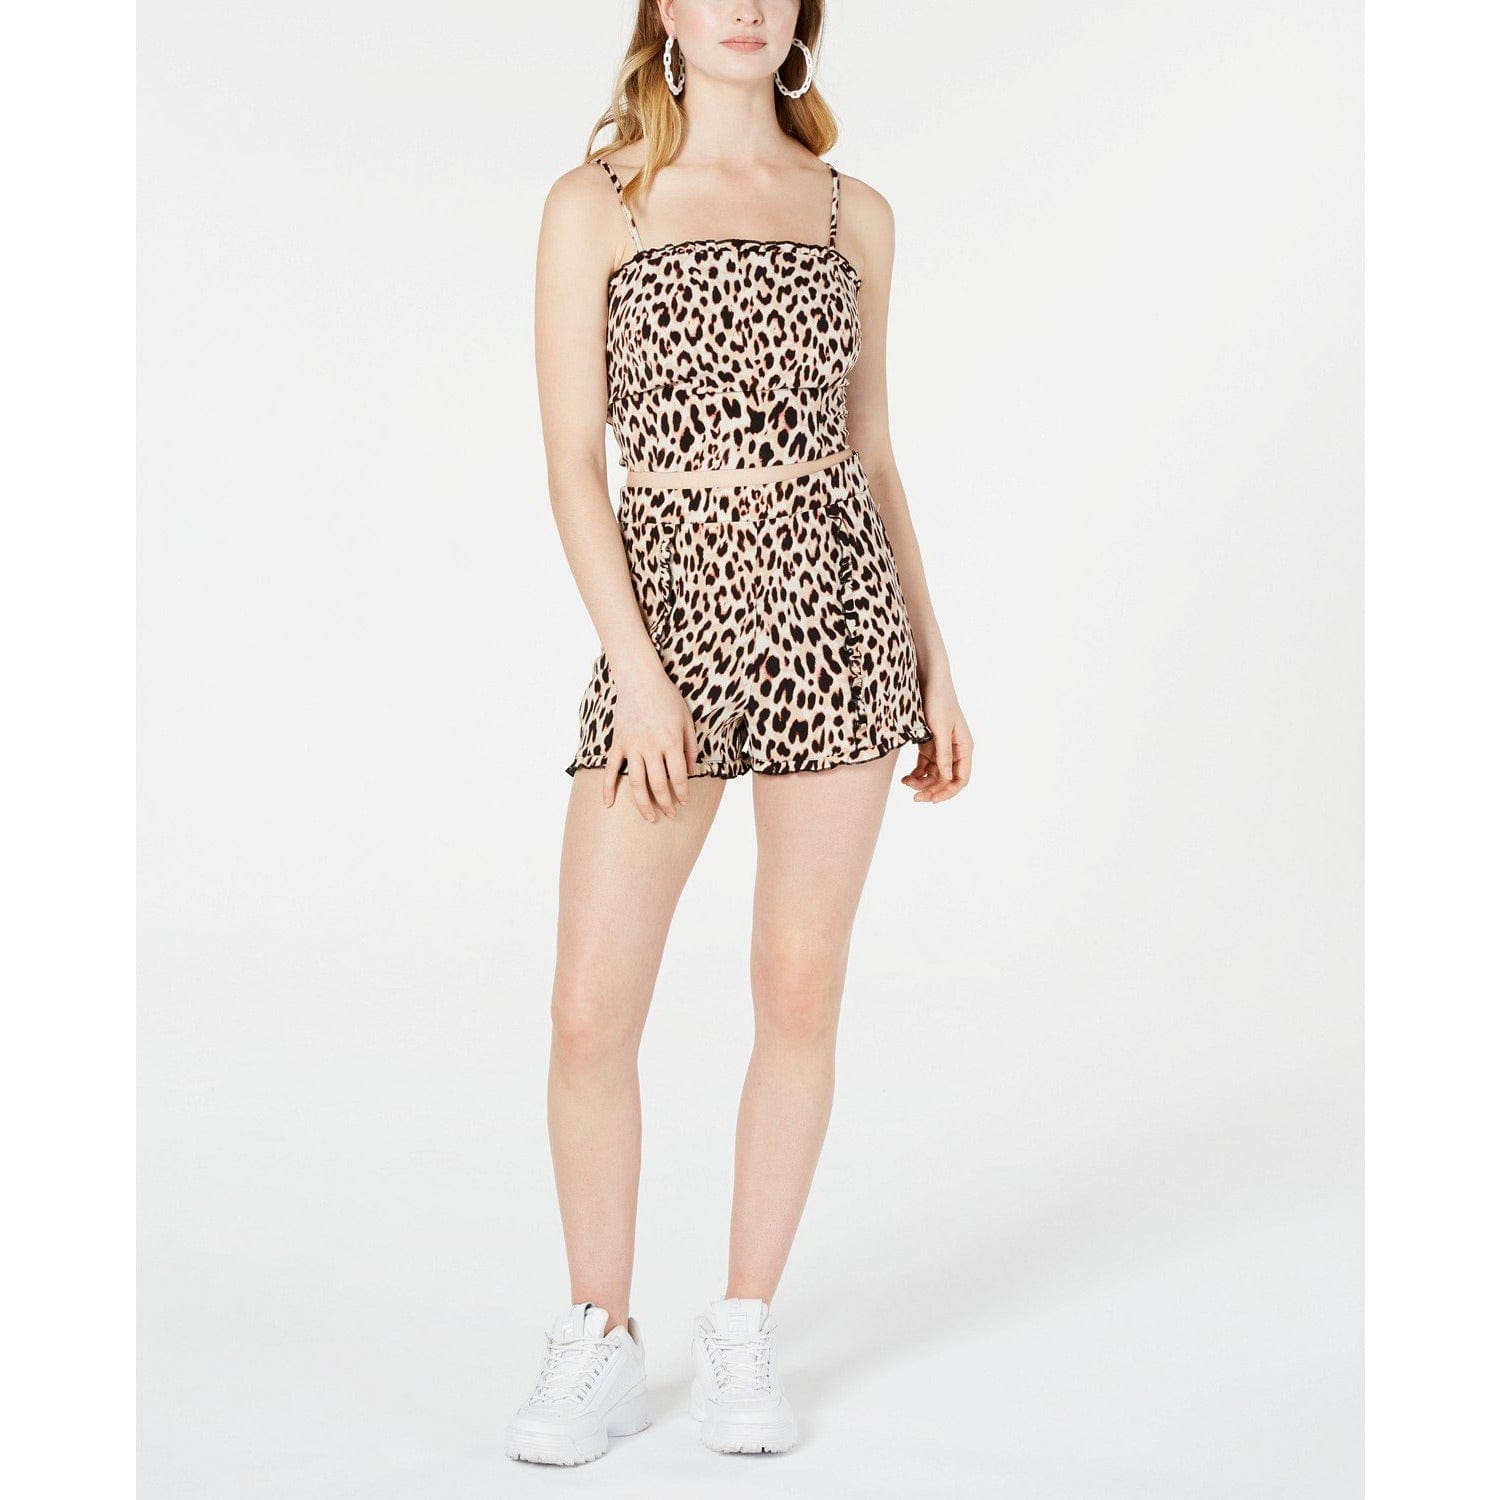 Material Girl Juniors' Printed Ruffle-Trimmed Crop Top Leopard Print sz Small - The Pink Pigs, A Compassionate Boutique